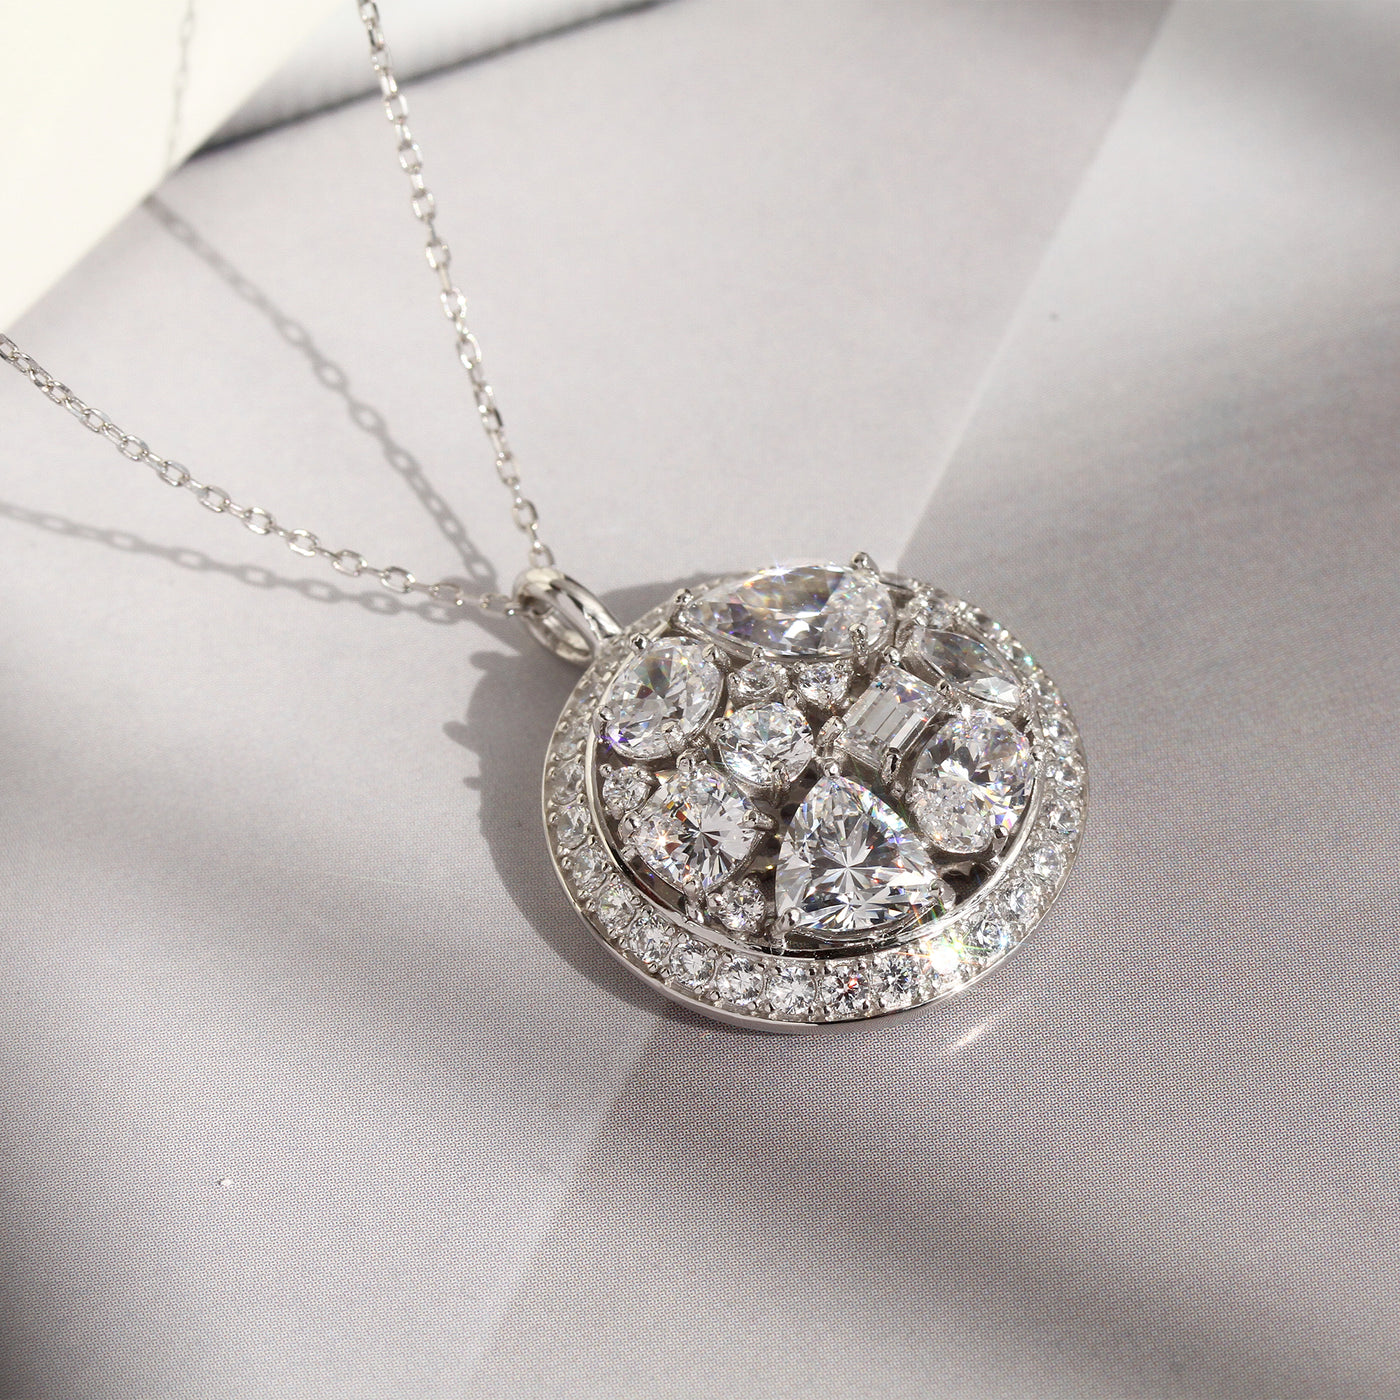 Multi Shape Stone Cluster Vintage Pendant Chain Necklace, Platinum Plated Sterling Silver